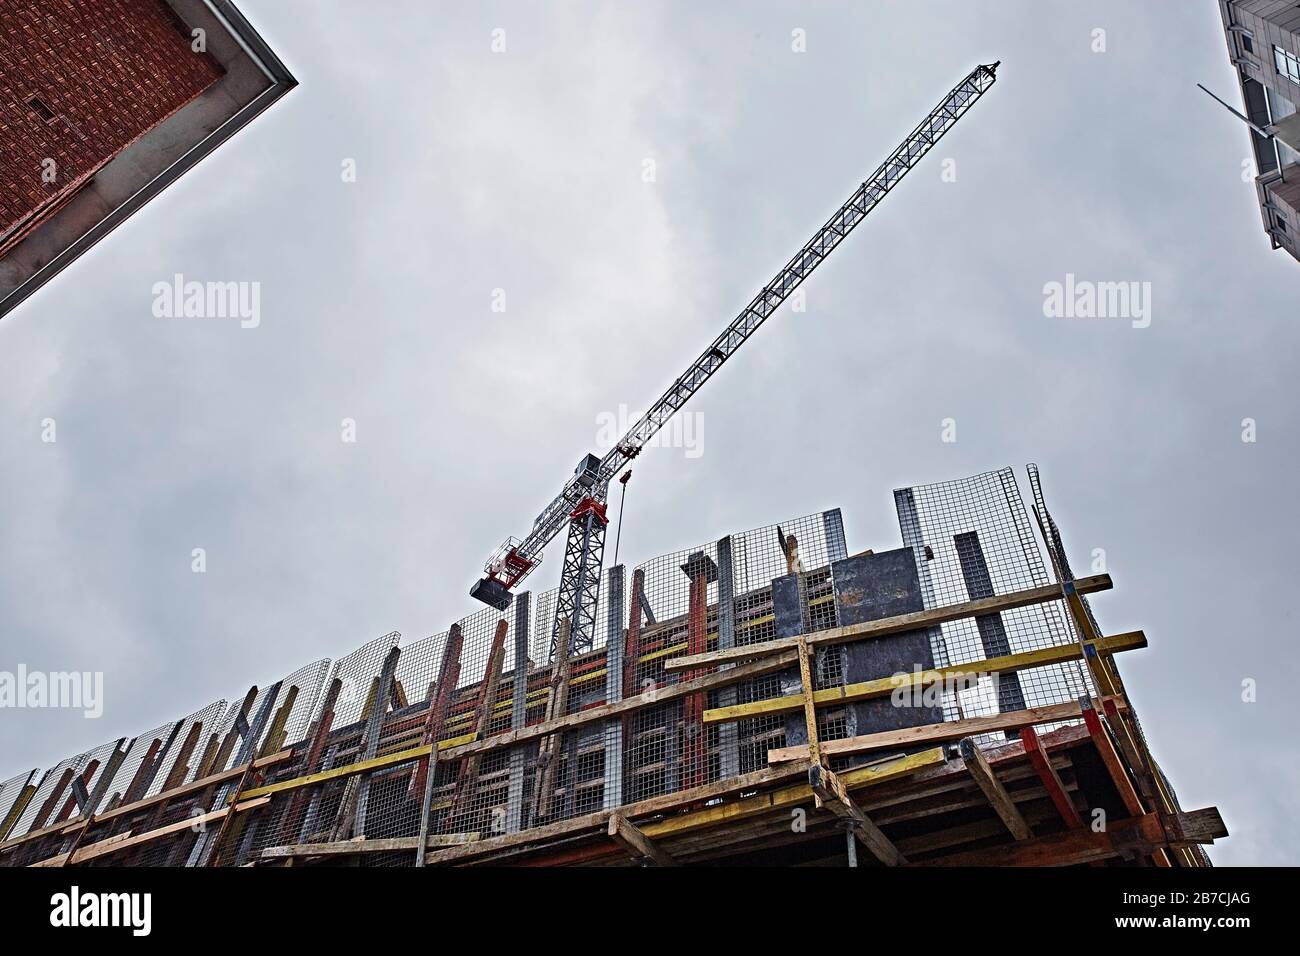 Construction site with tower crane and formwork Stock Photo